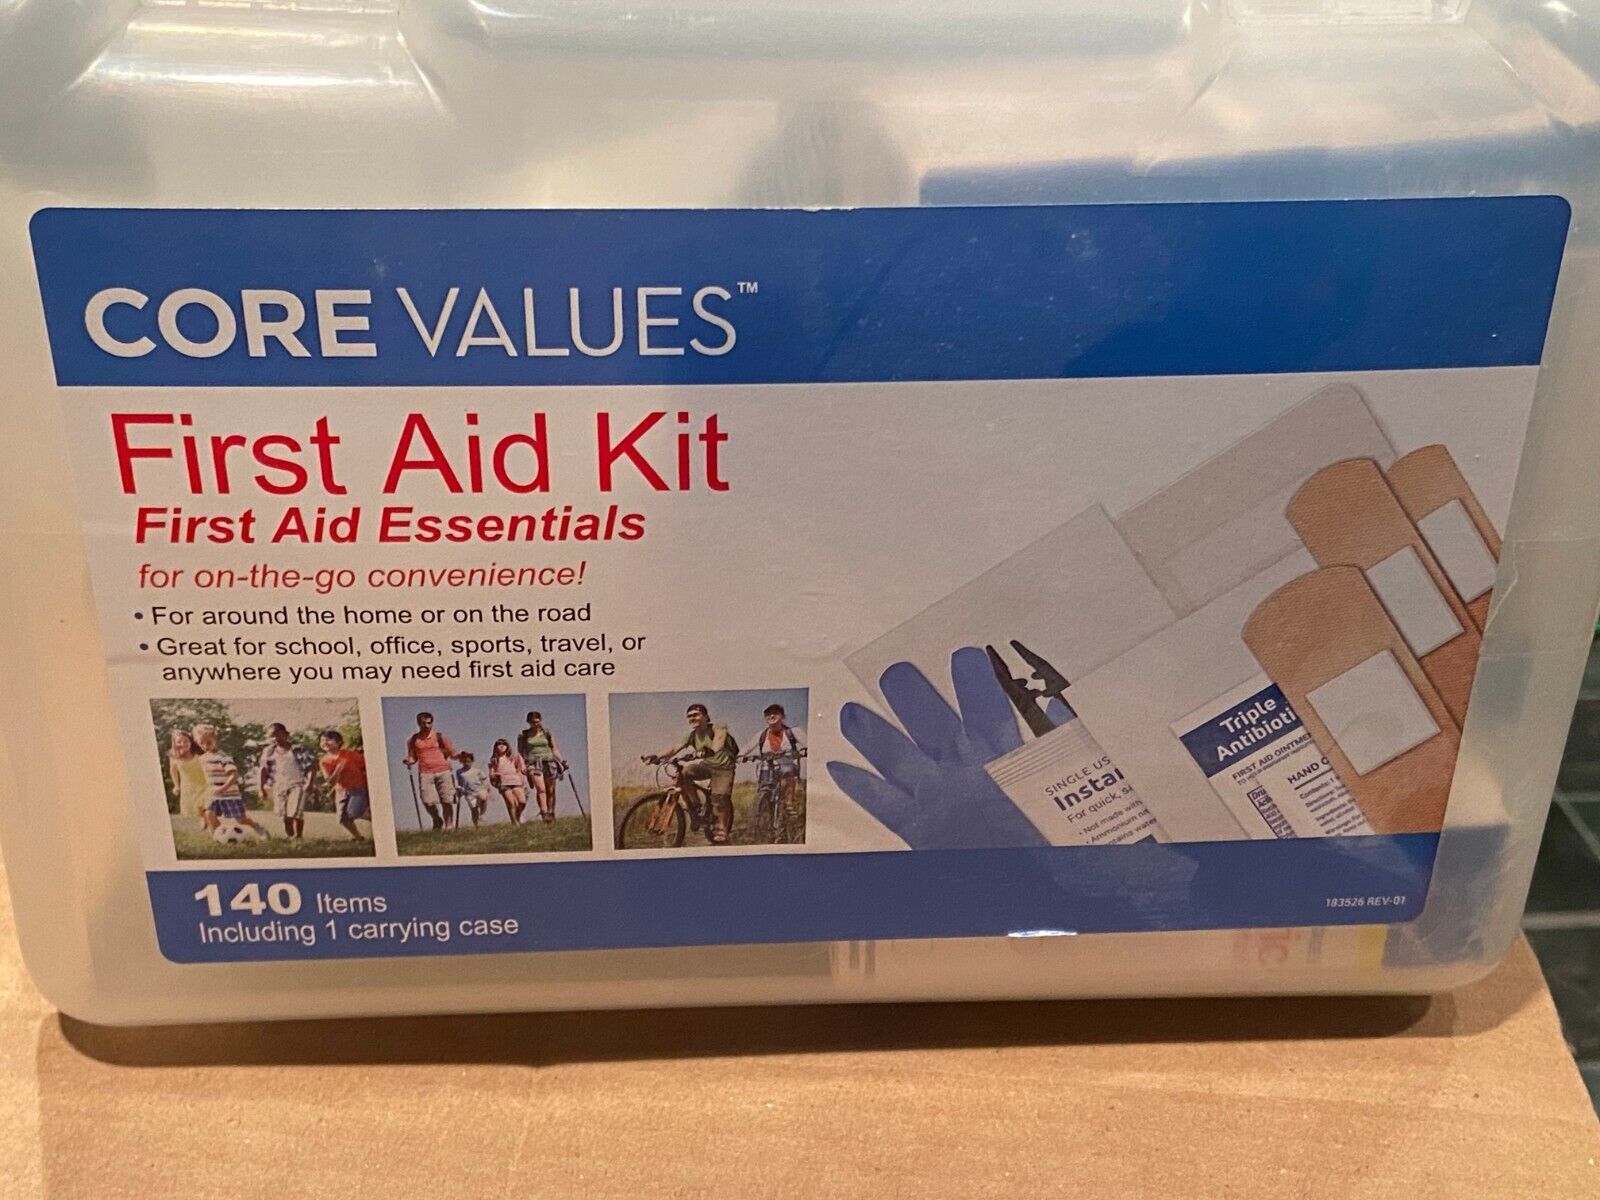 Core Values First Aid Kit On the Go Case and 50 similar items